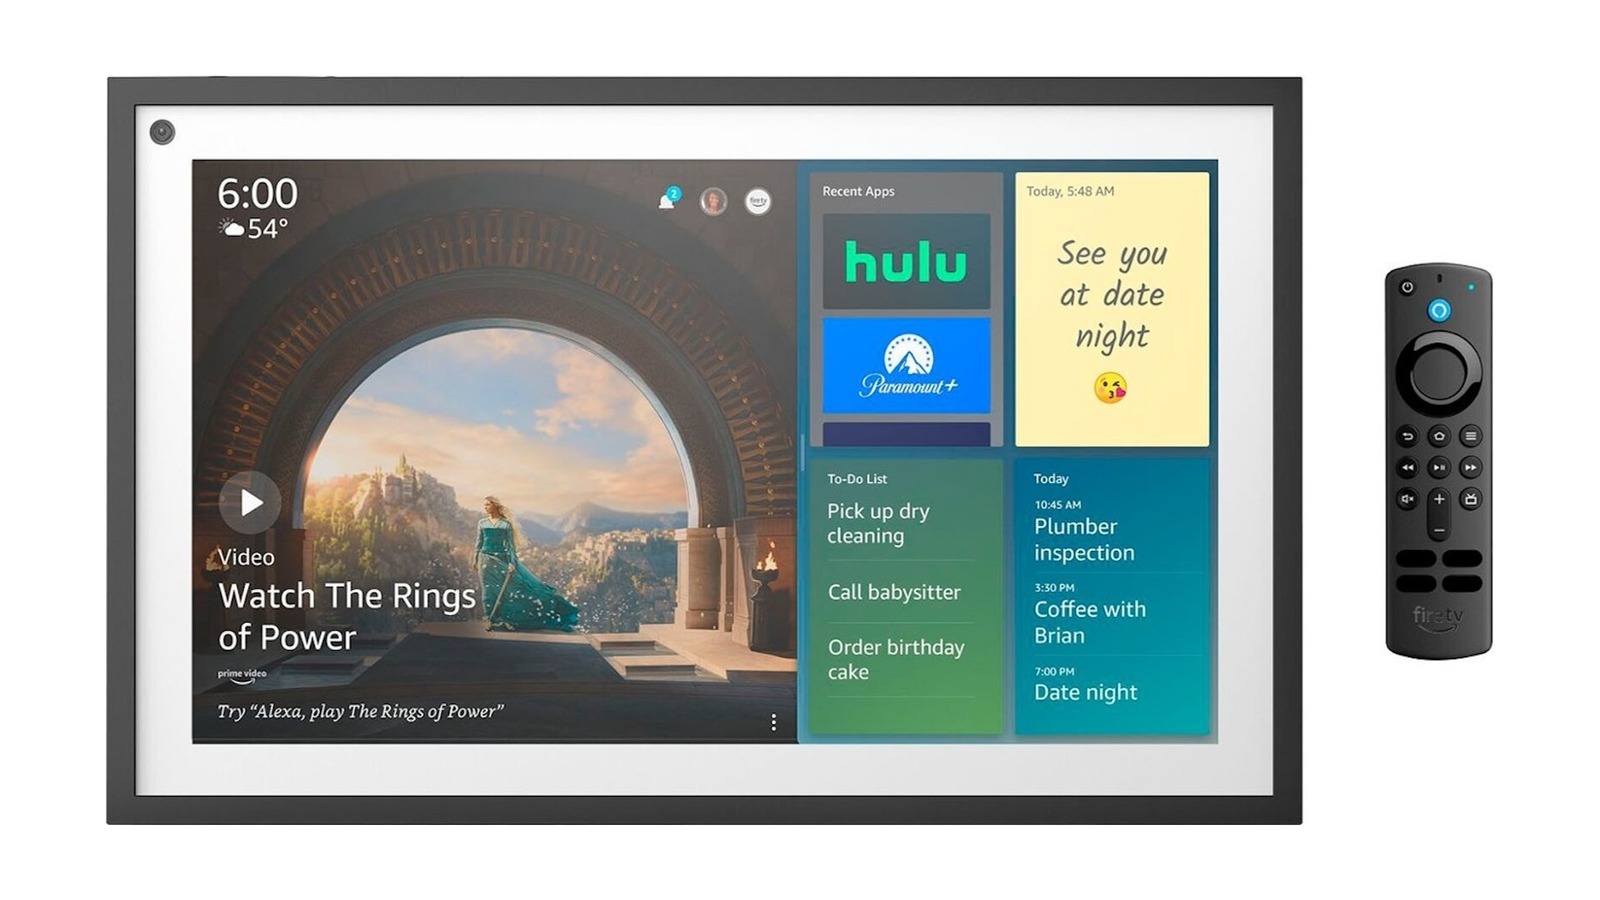 Fire TV interface update for the Echo Show 15 has arrived